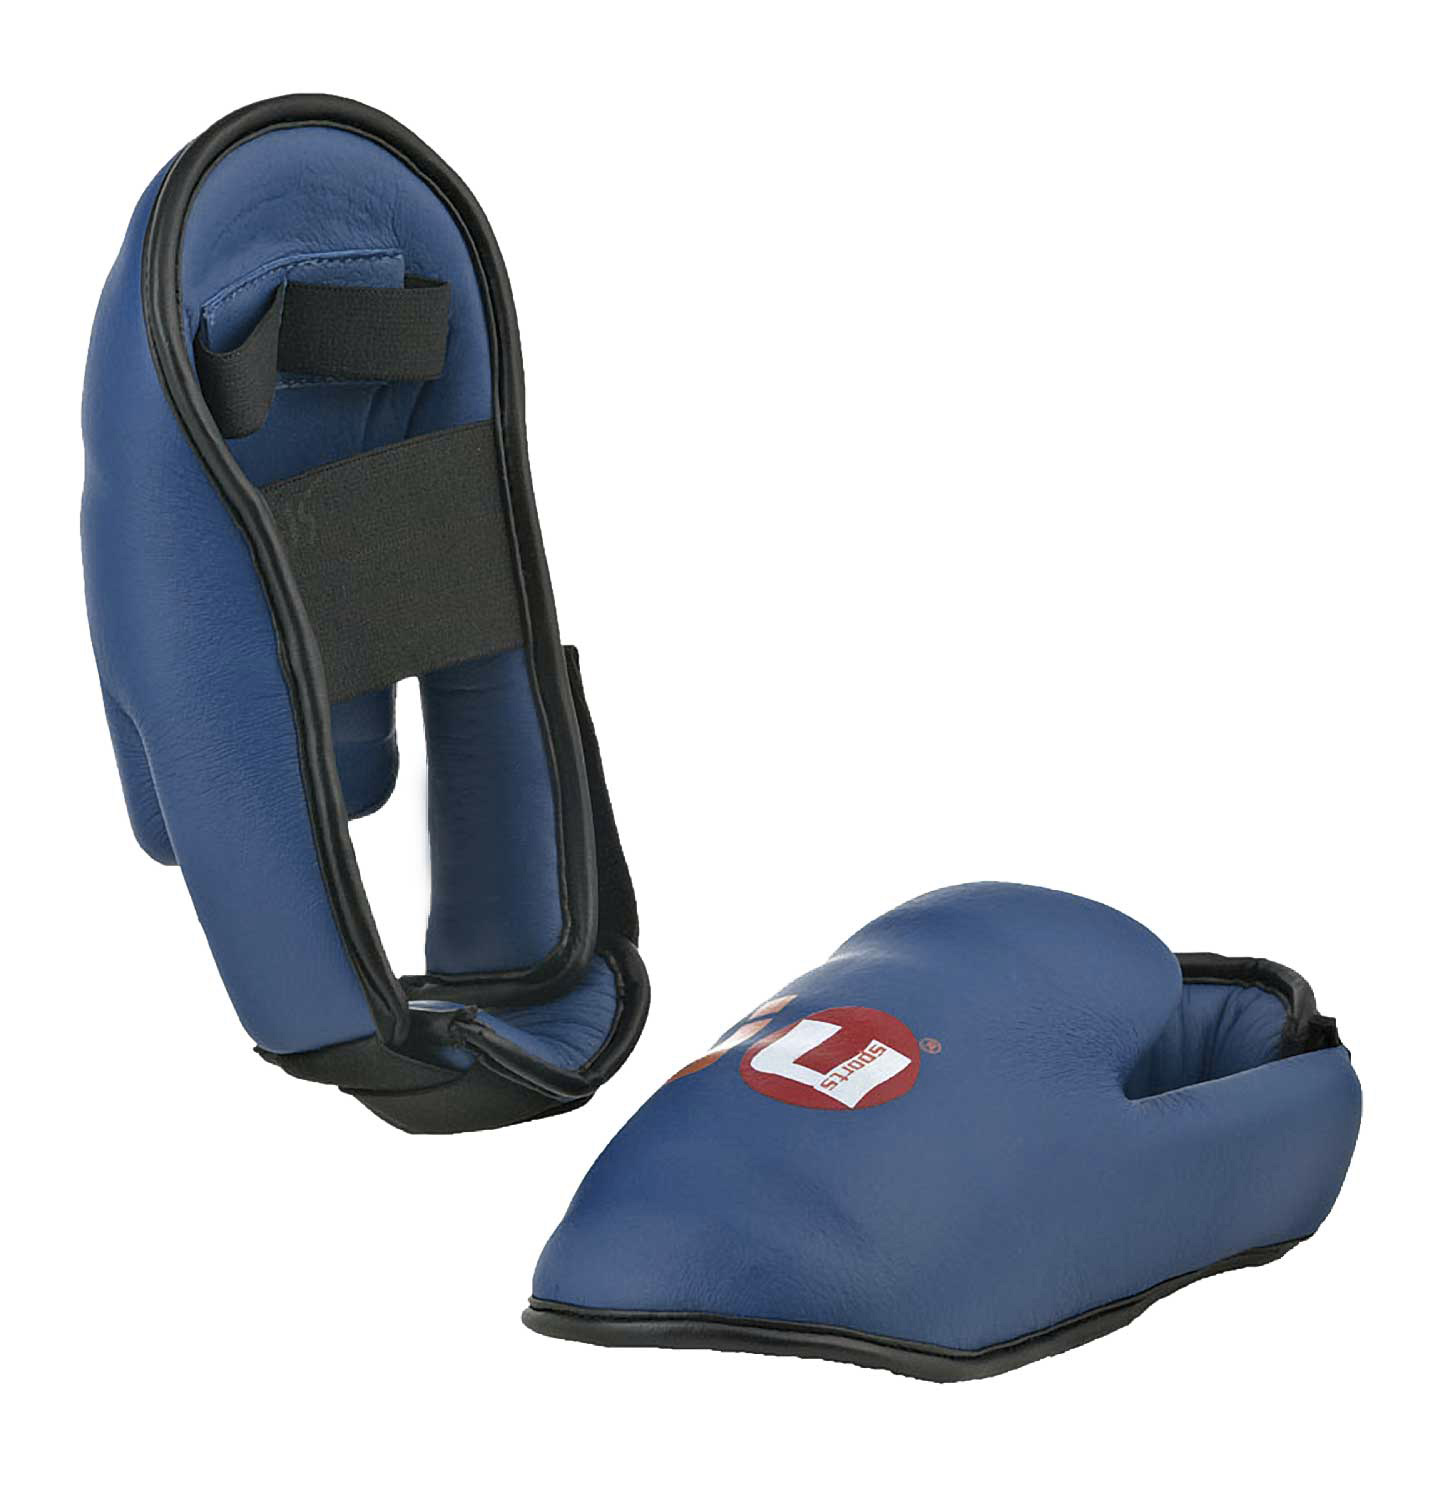 Ju-Sports Karate / Martial Arts Sparring Boots Blue